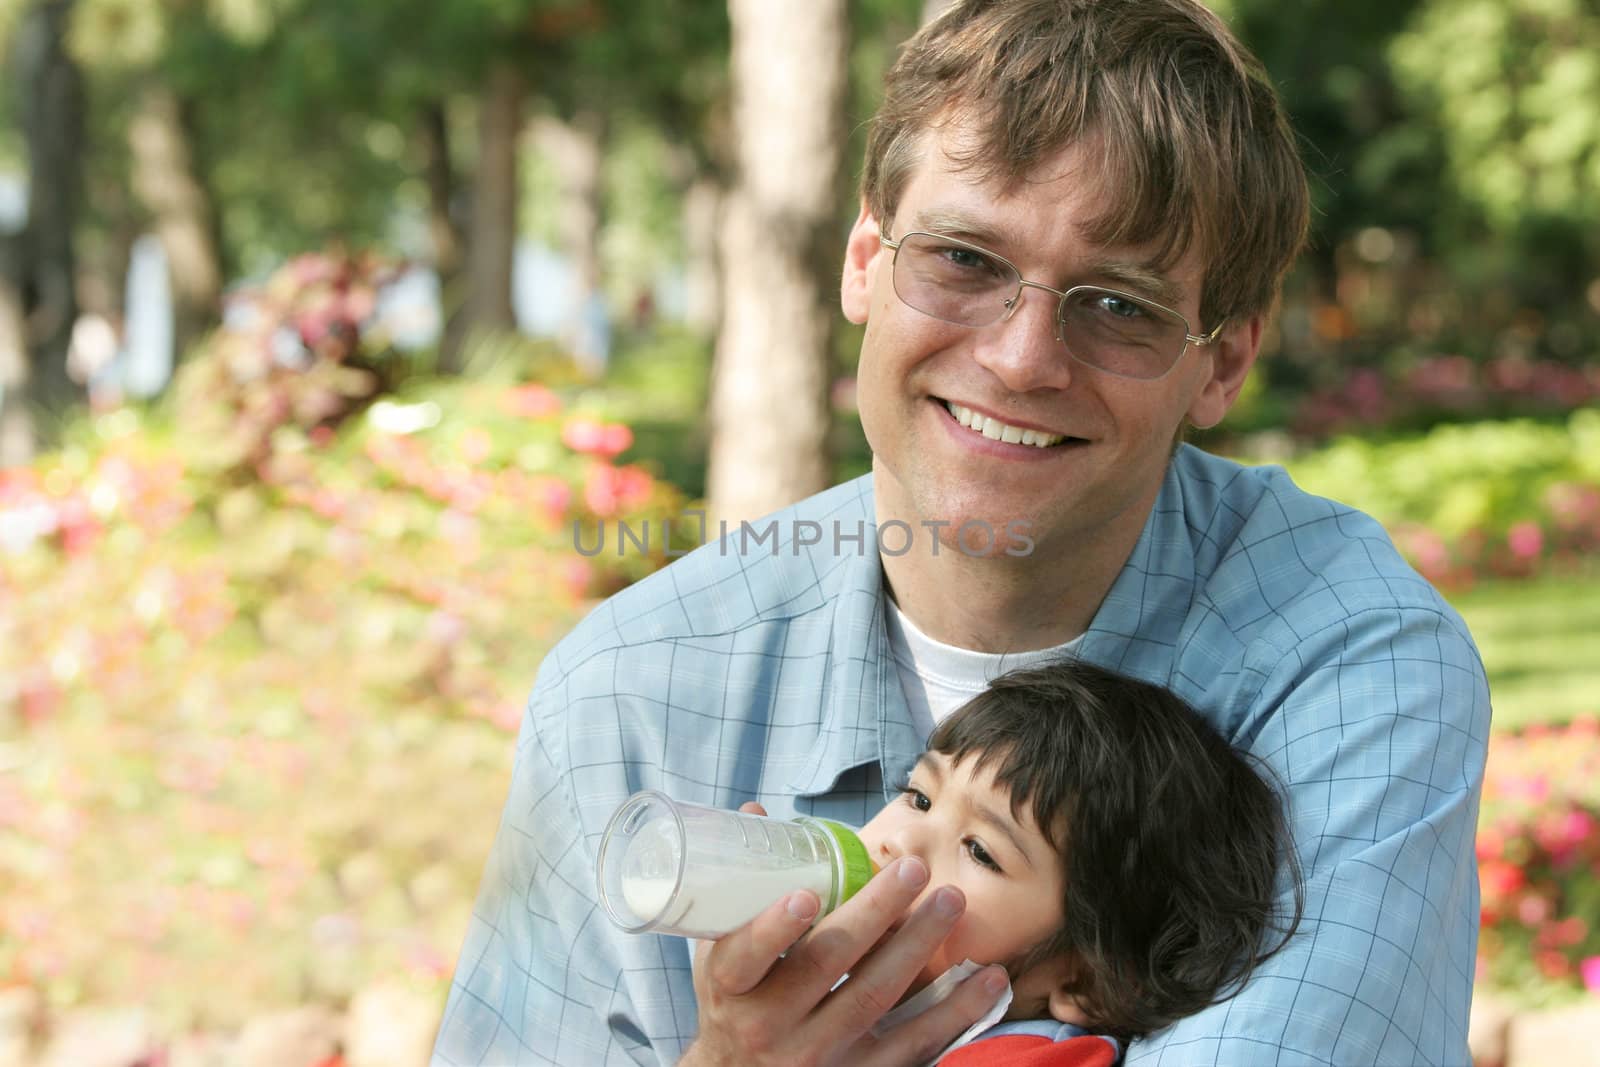 Father feeding baby a bottle in the park by jarenwicklund